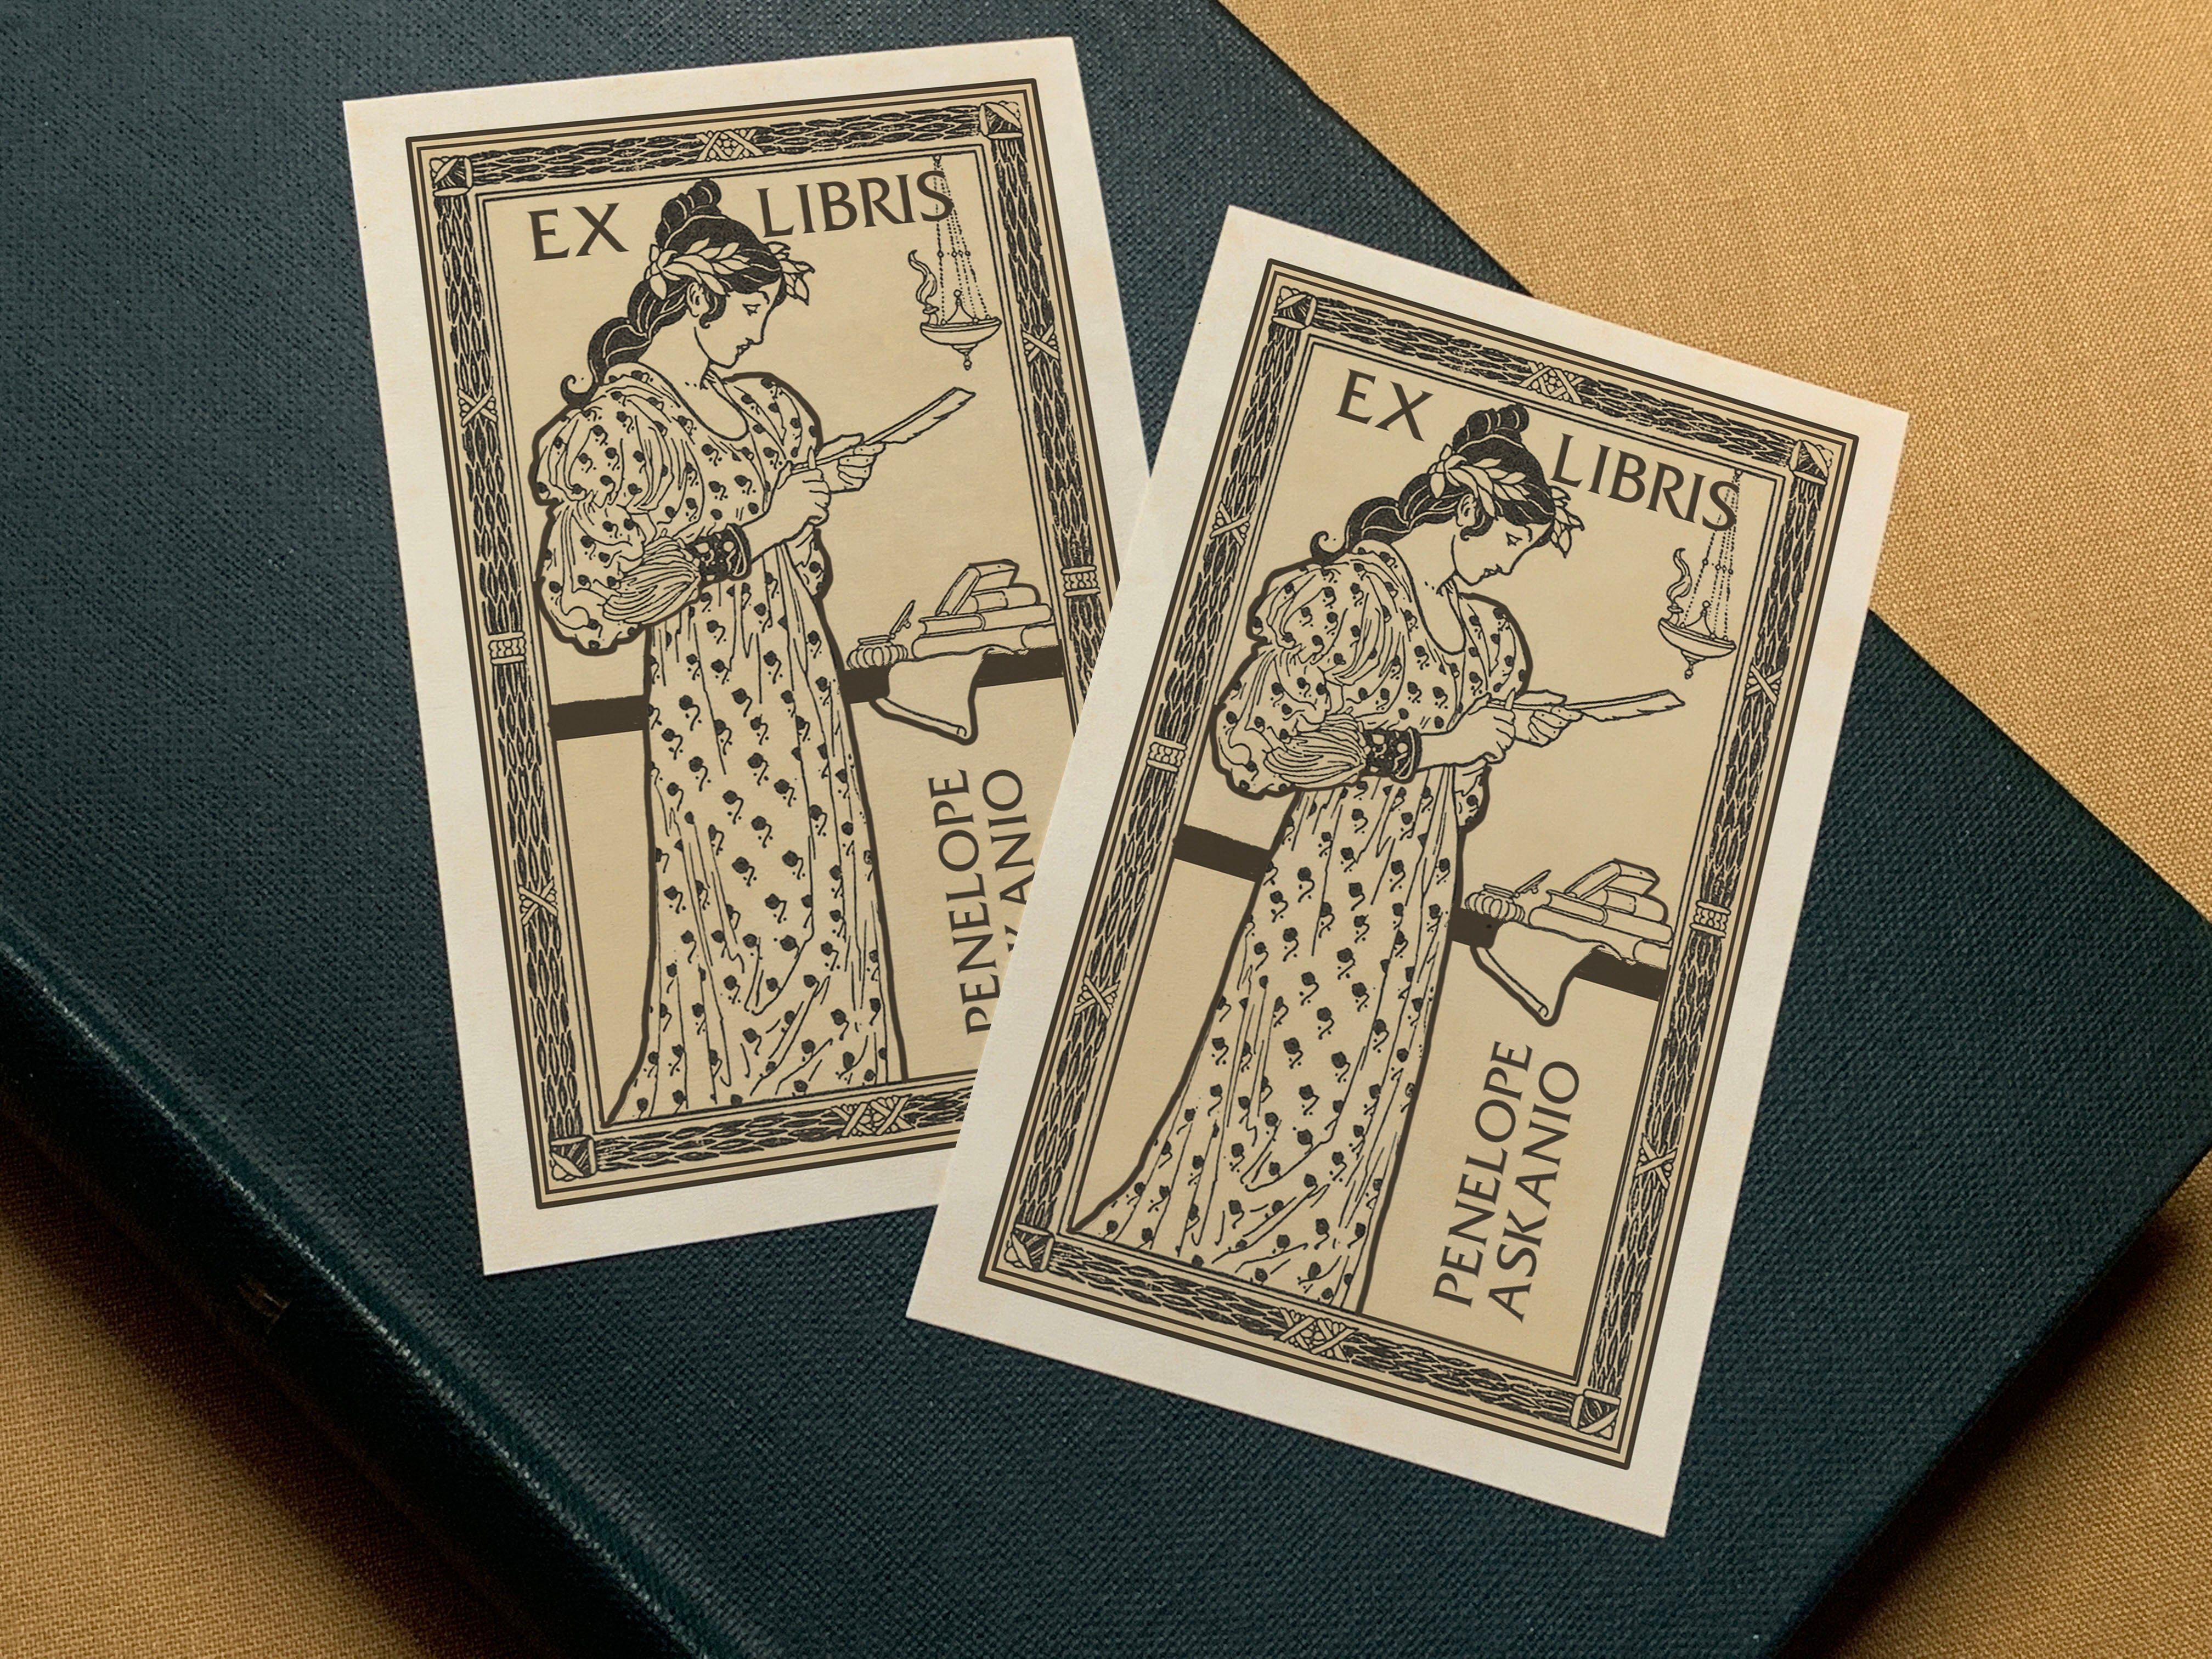 Sappho, Personalized Ex-Libris Bookplates, Crafted on Traditional Gummed Paper, 2.5in x 4in, Set of 30